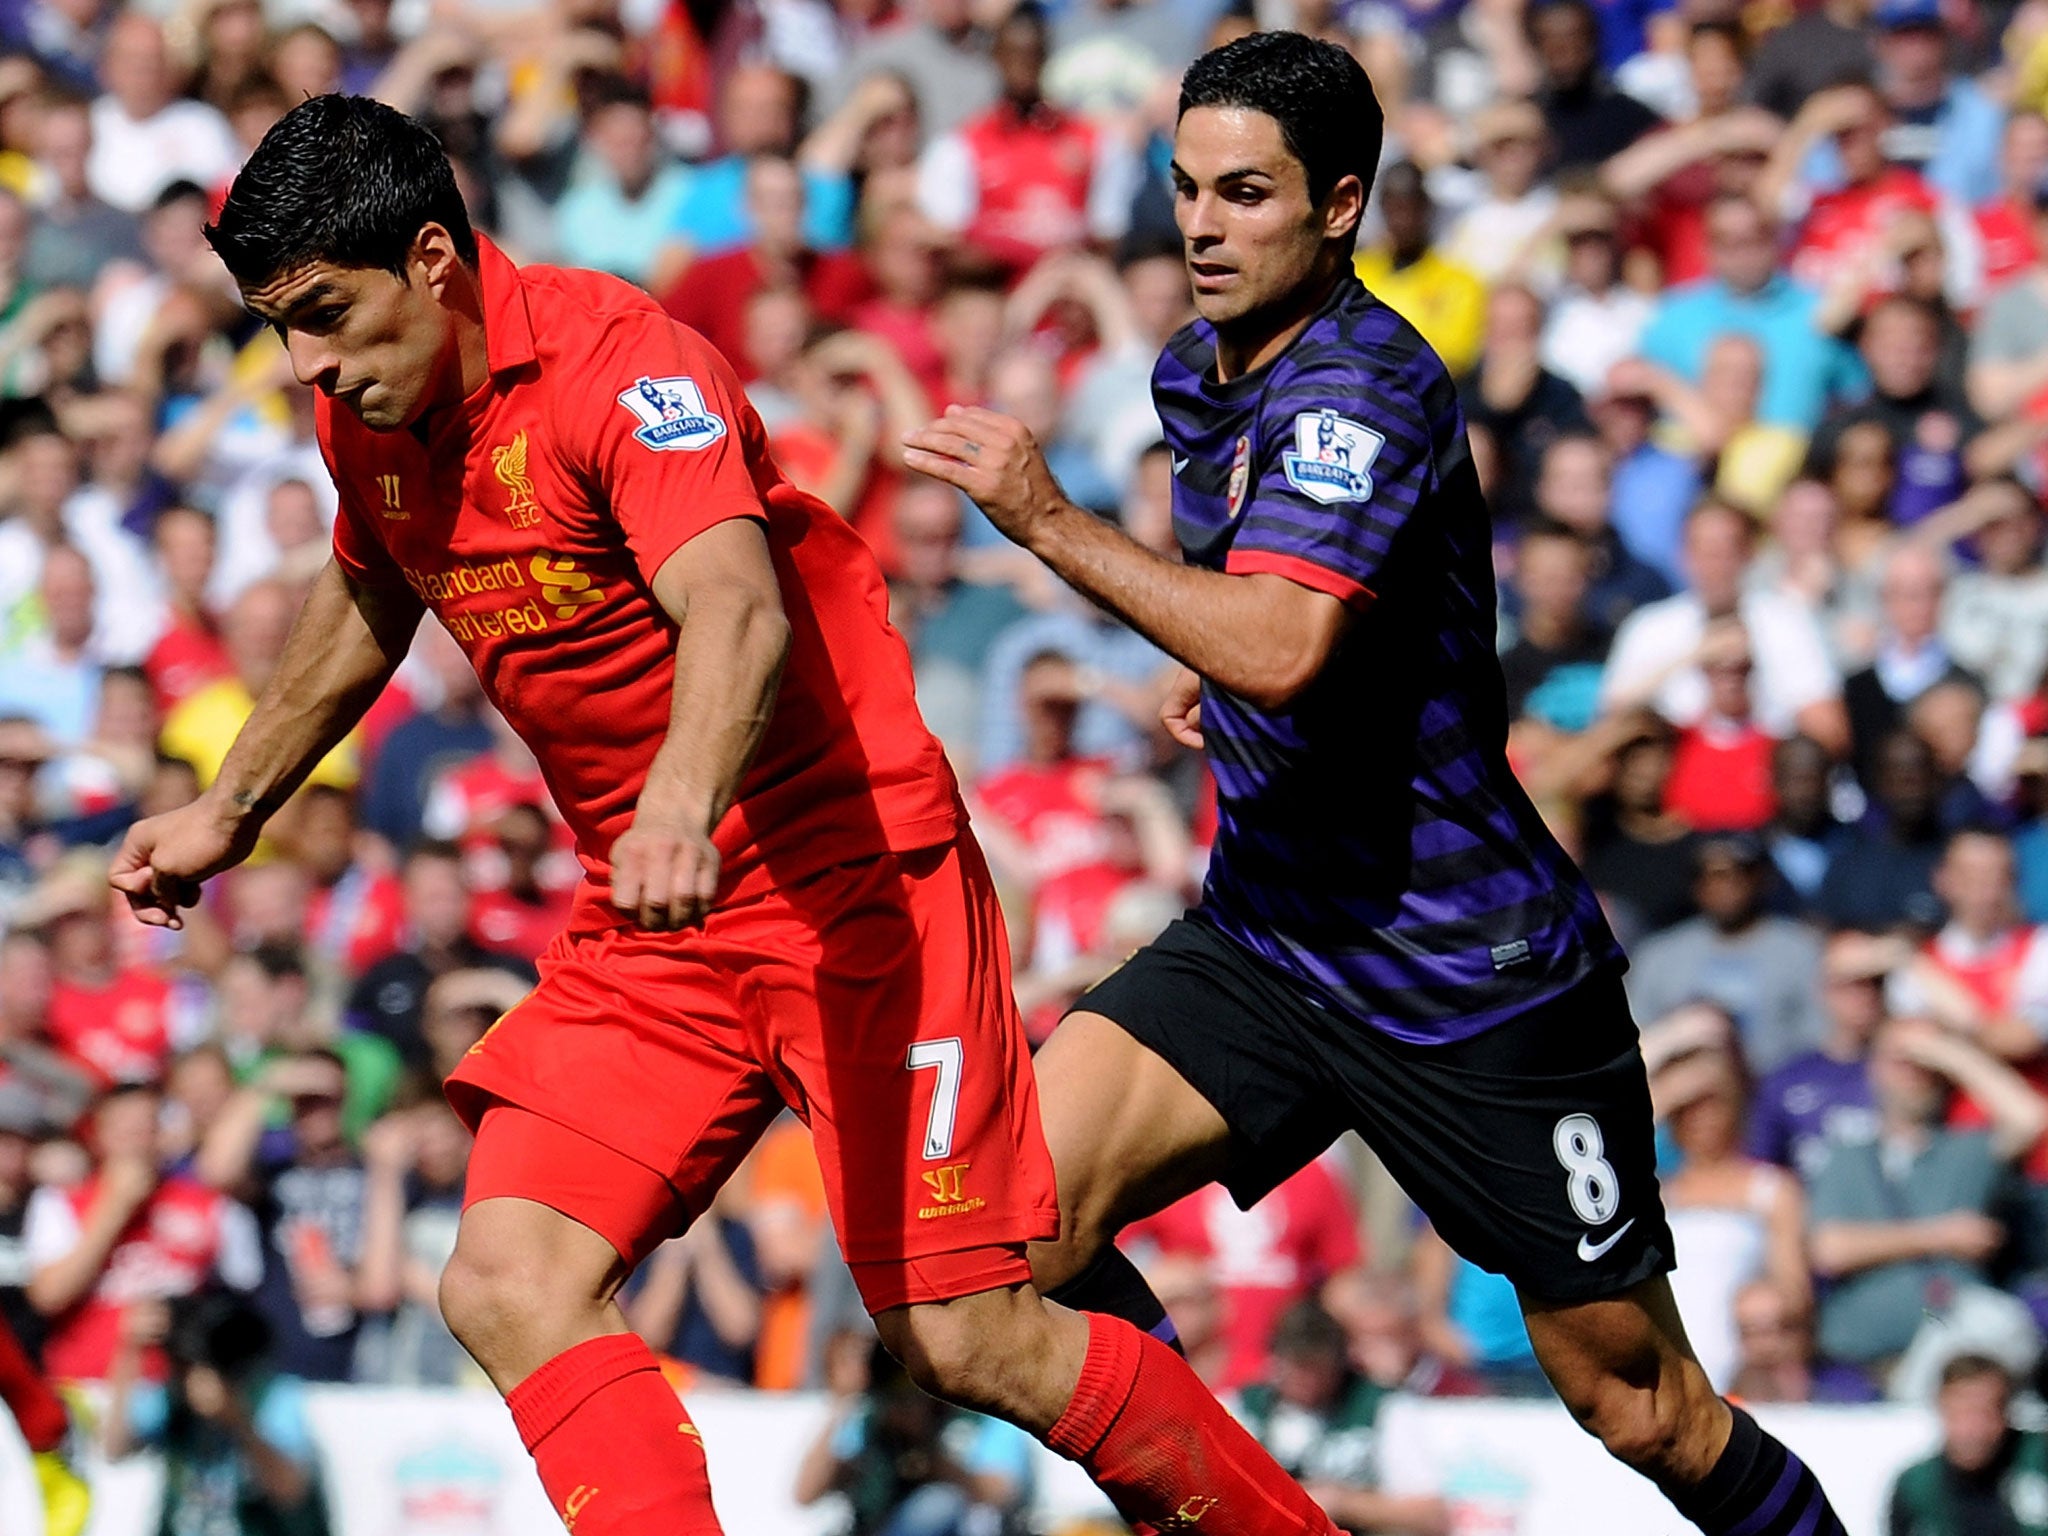 Luis Suarez (left) is pursued by Mikel Arteta during Arsenal's 2-0 win at Liverpool in the Premier League in September 2012